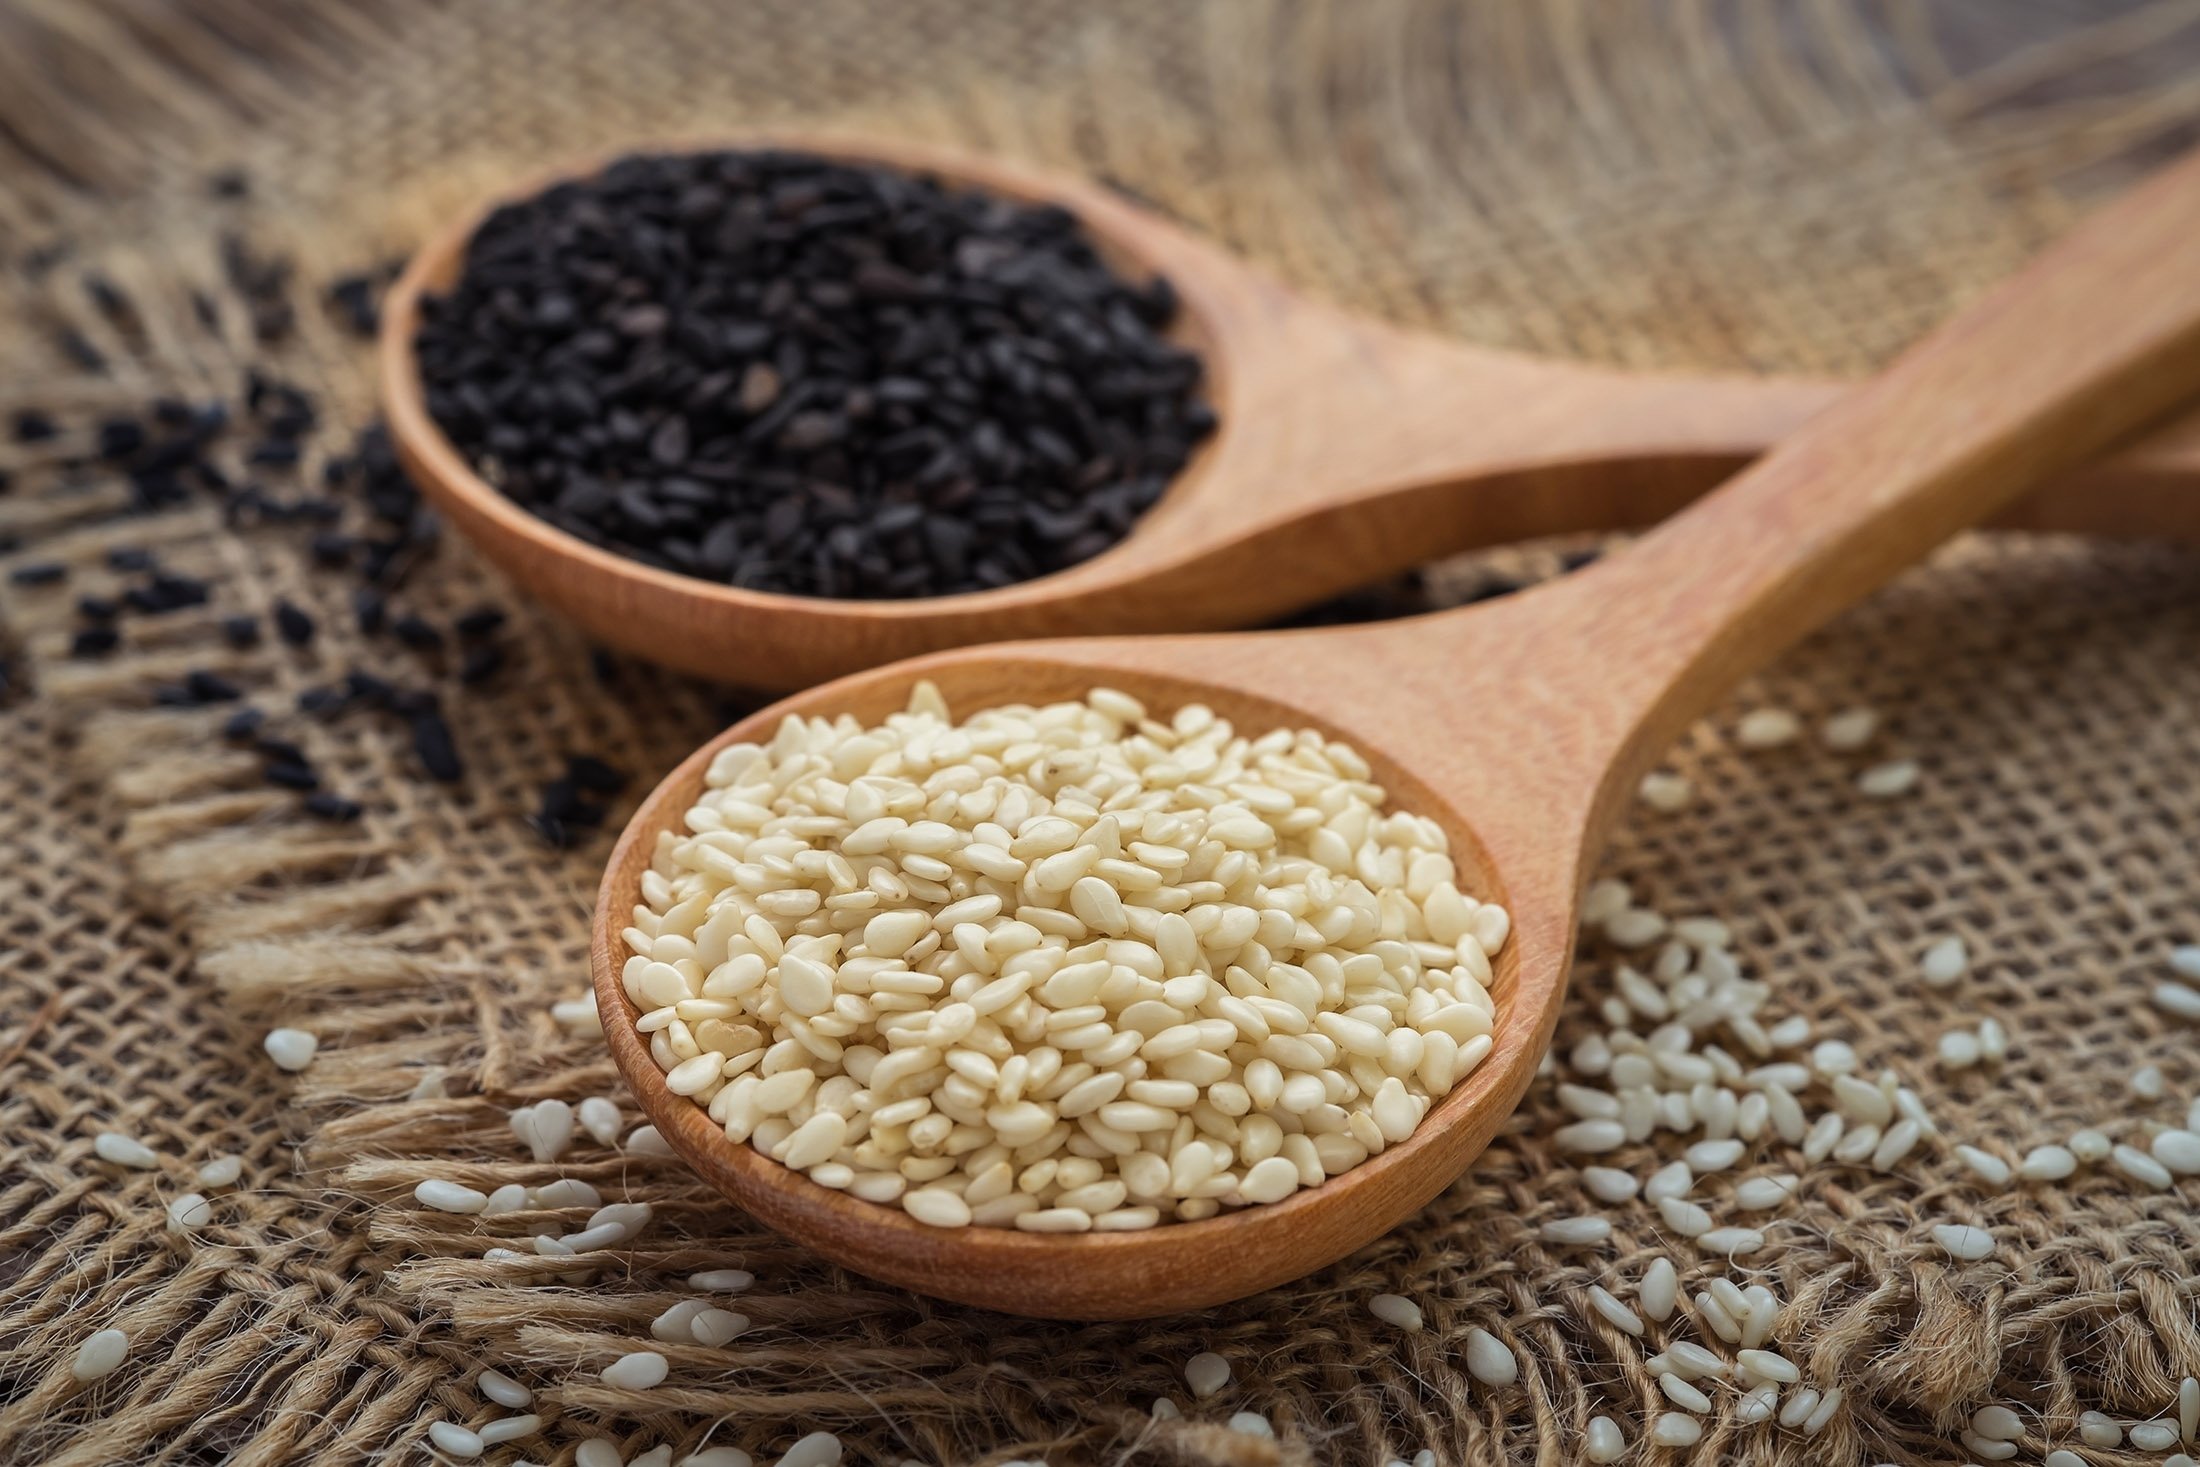 Open sesame! All about this special seed in Turkish cuisine | Daily Sabah